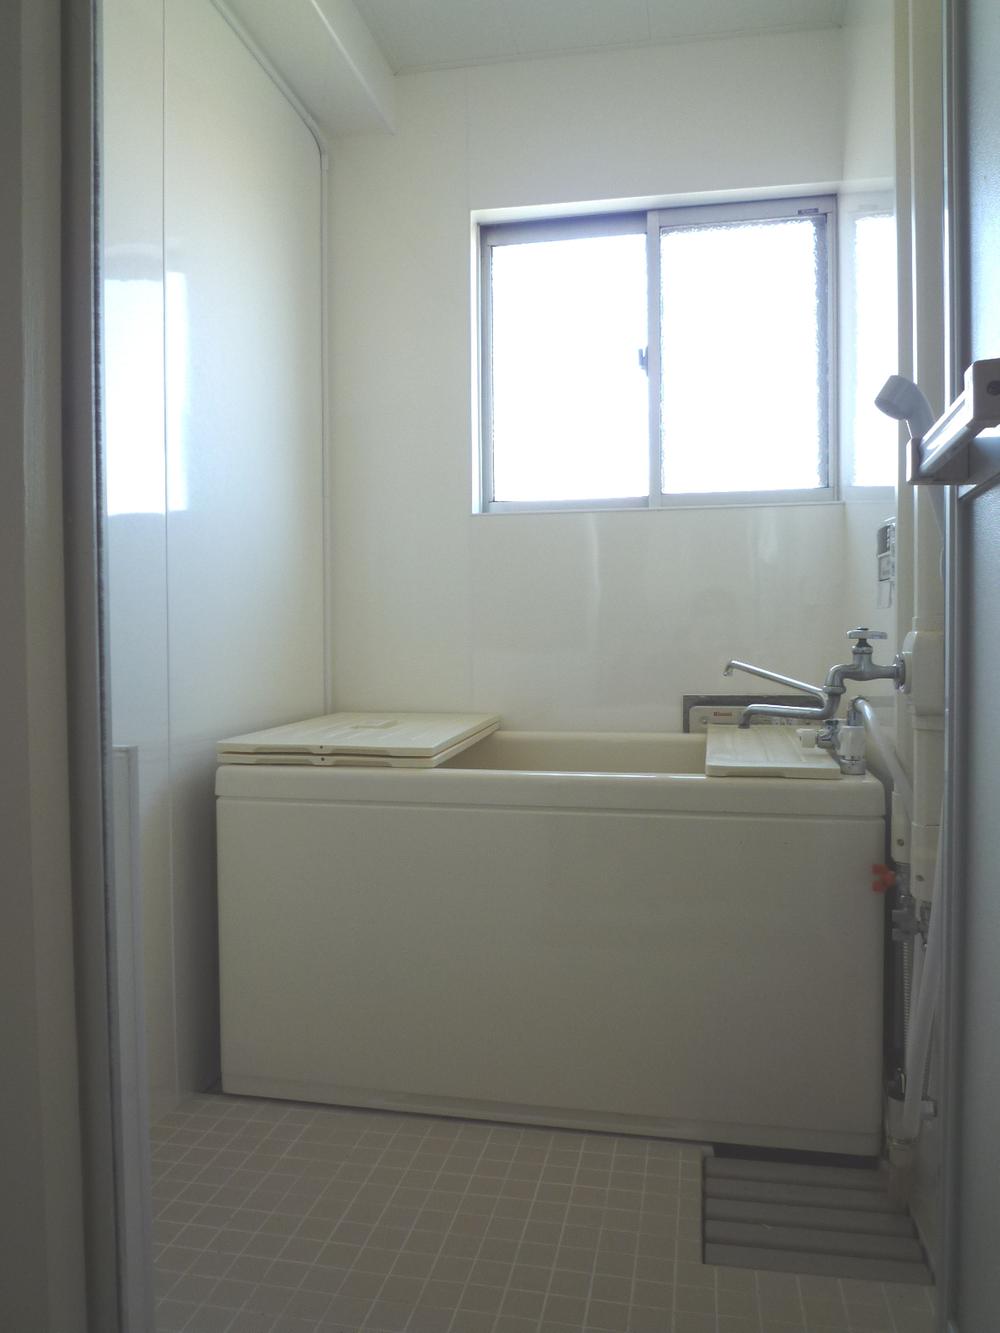 Bathroom. Bright bathroom with a window. With reheating function